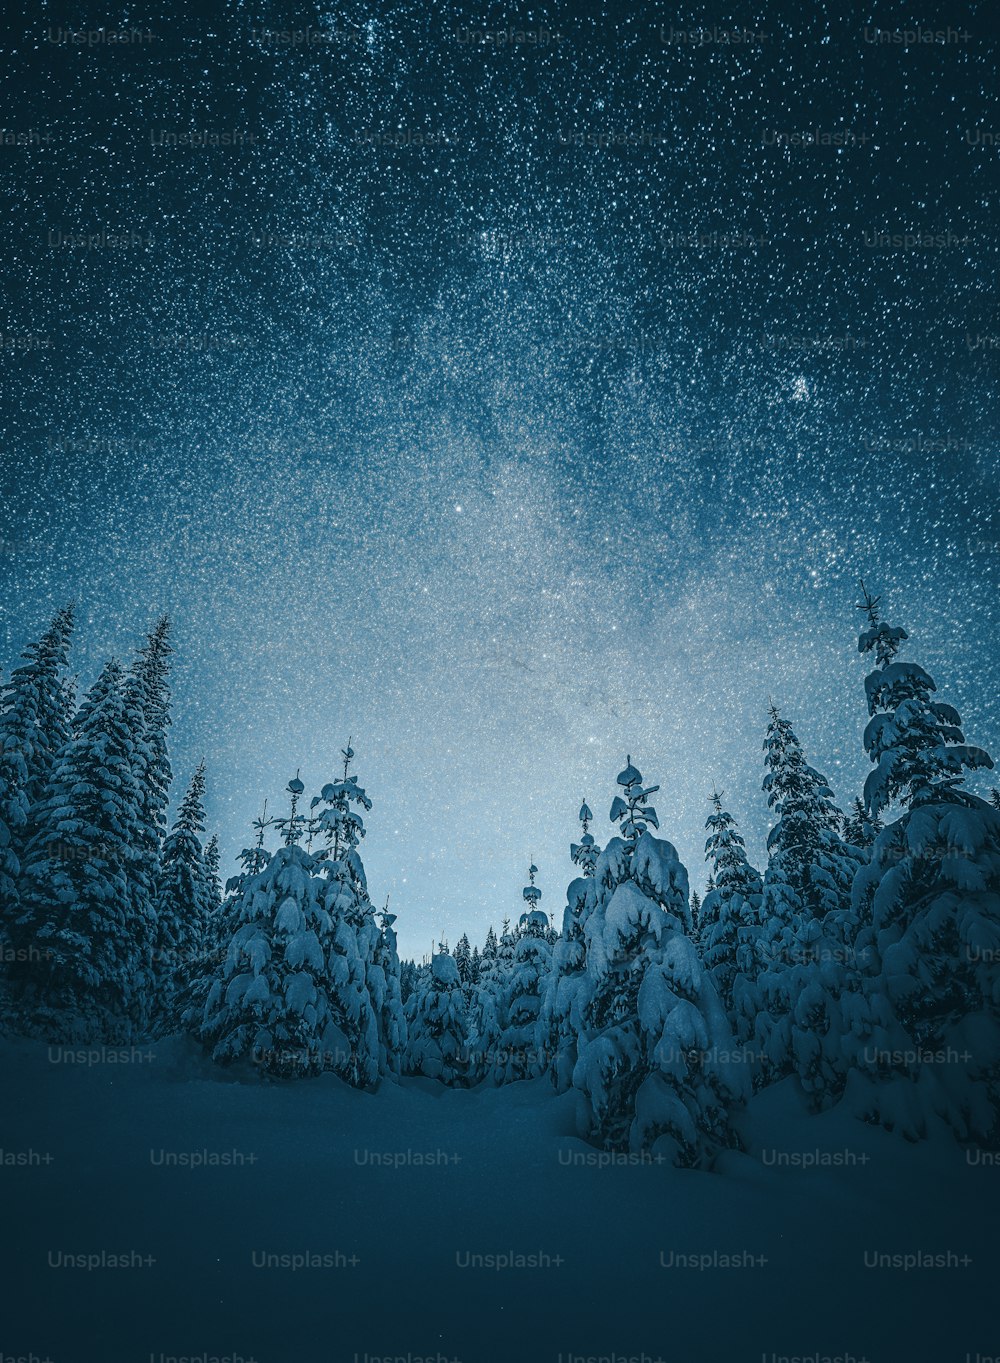 Winter Aesthetic Pictures  Download Free Images on Unsplash